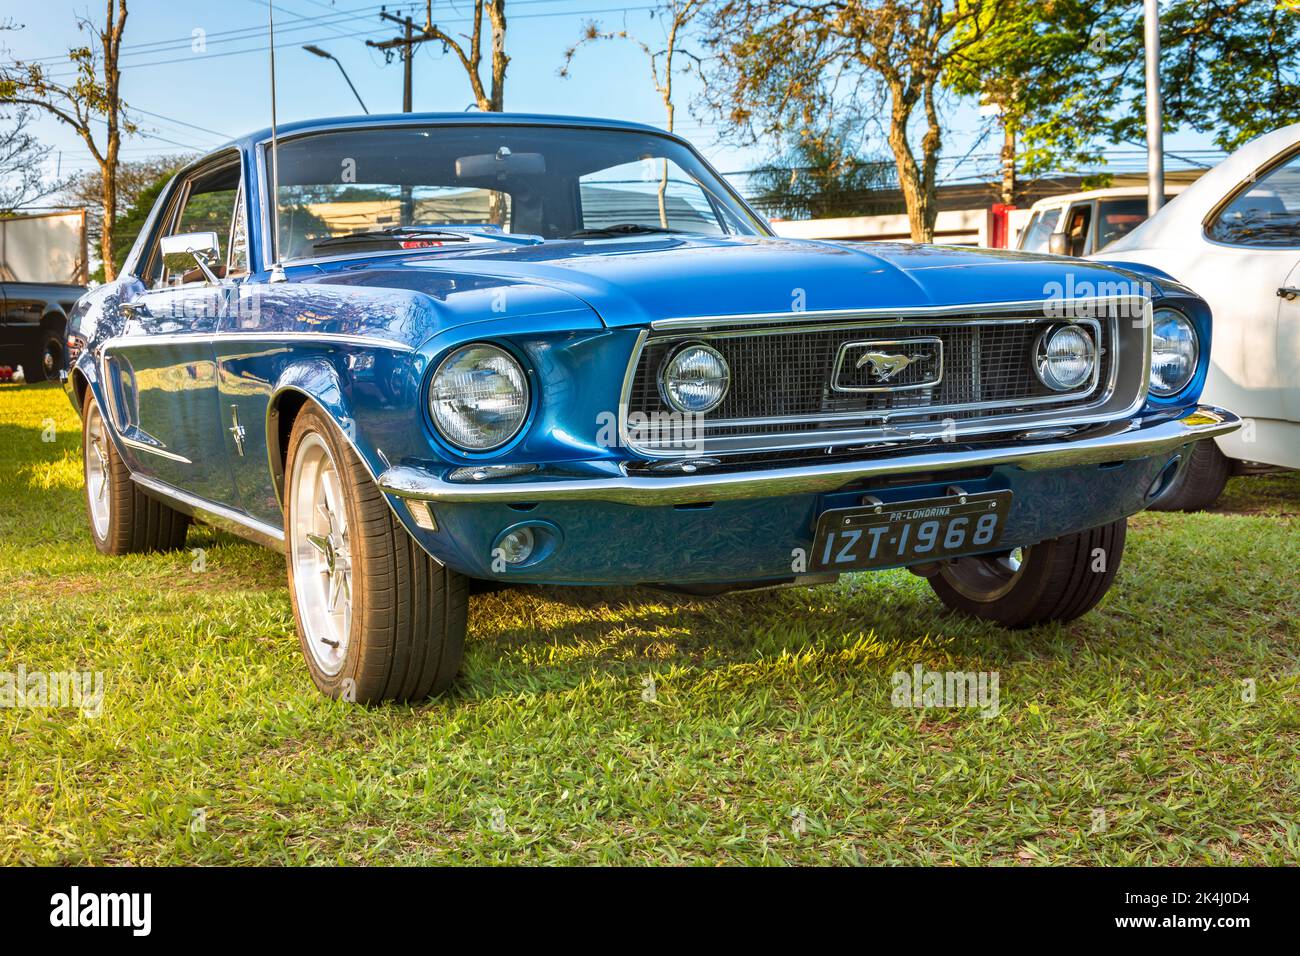 Vehicle Ford Mustang 1968 on display at vintage car show. Hardtop, a true muscle car. Stock Photo